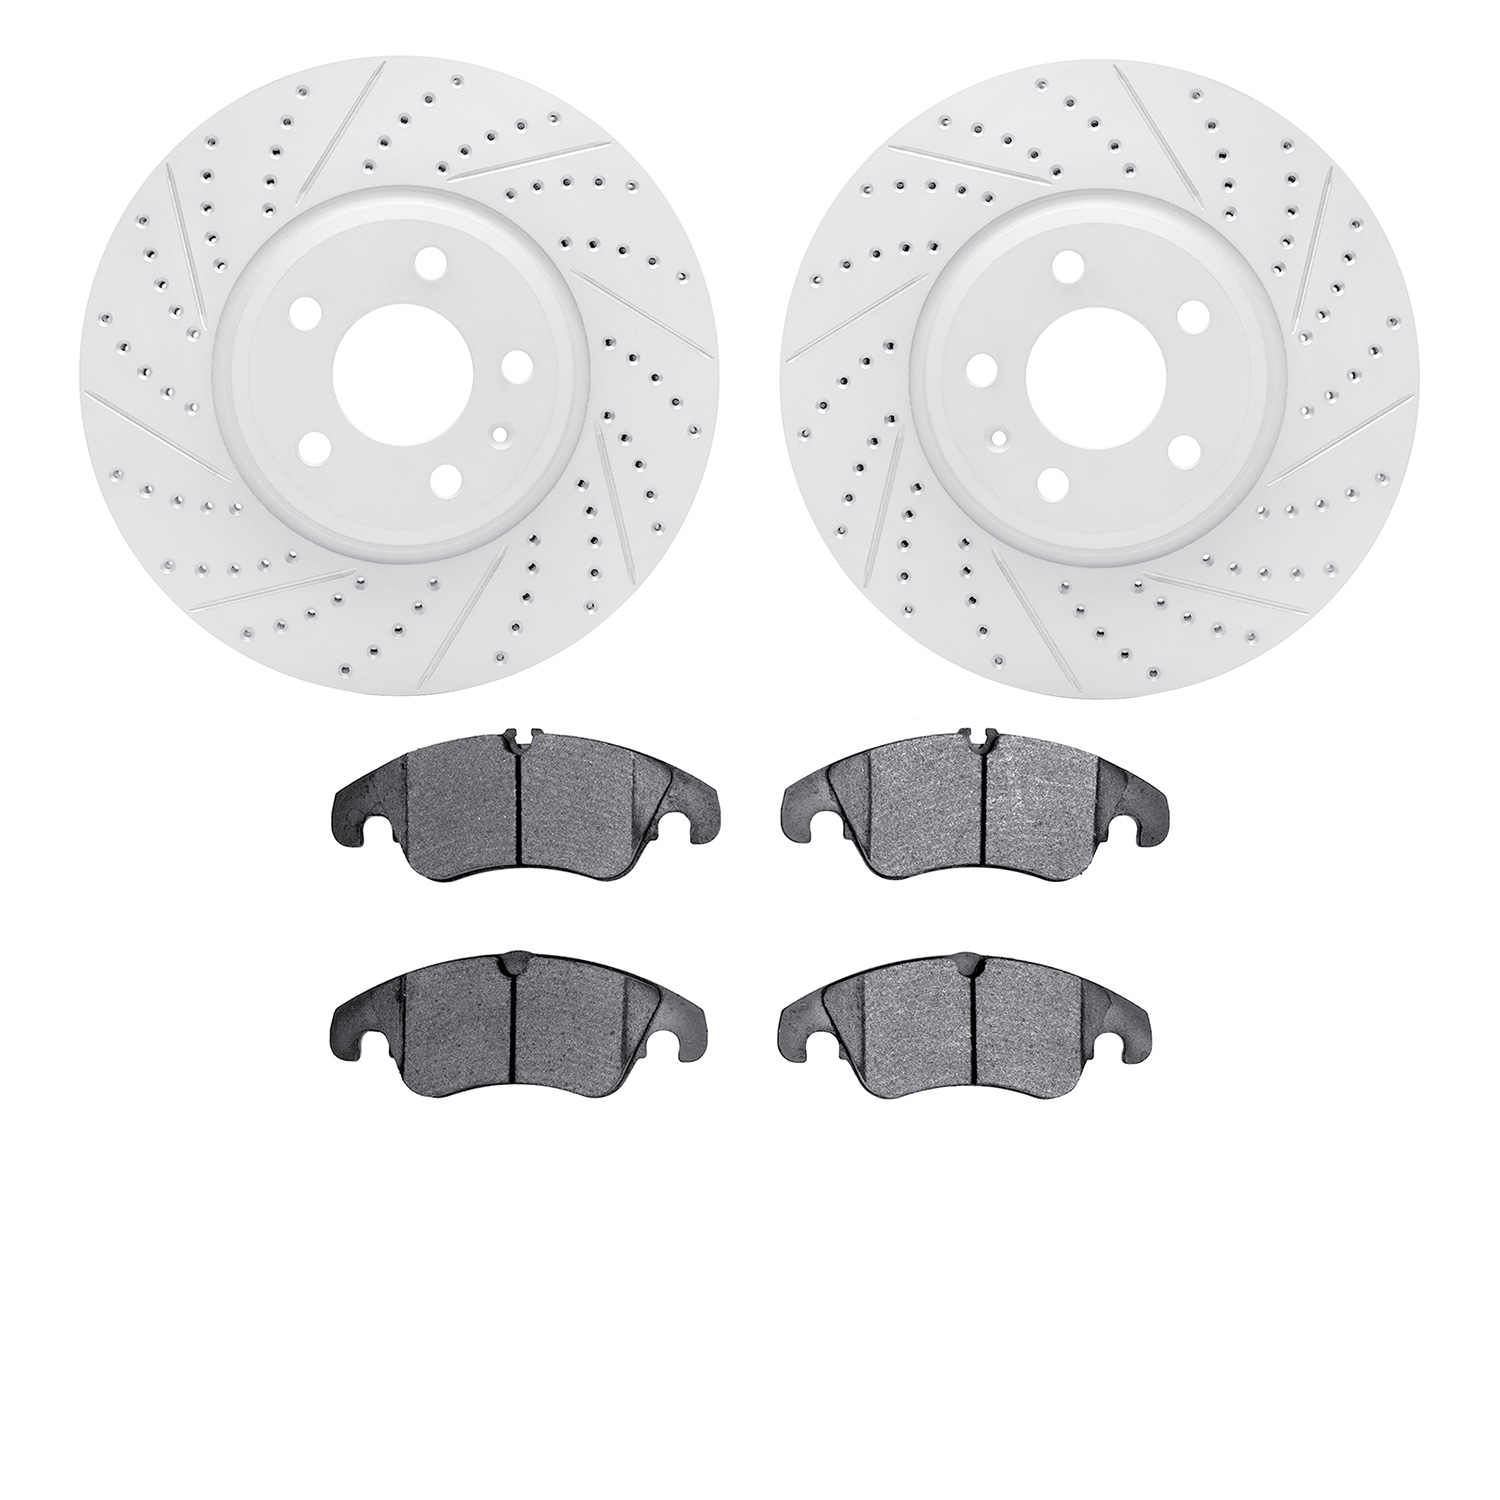 2502-73053 Geoperformance Drilled/Slotted Rotors w/5000 Advanced Brake Pads Kit, 2008-2011 Audi/Volkswagen, Position: Front